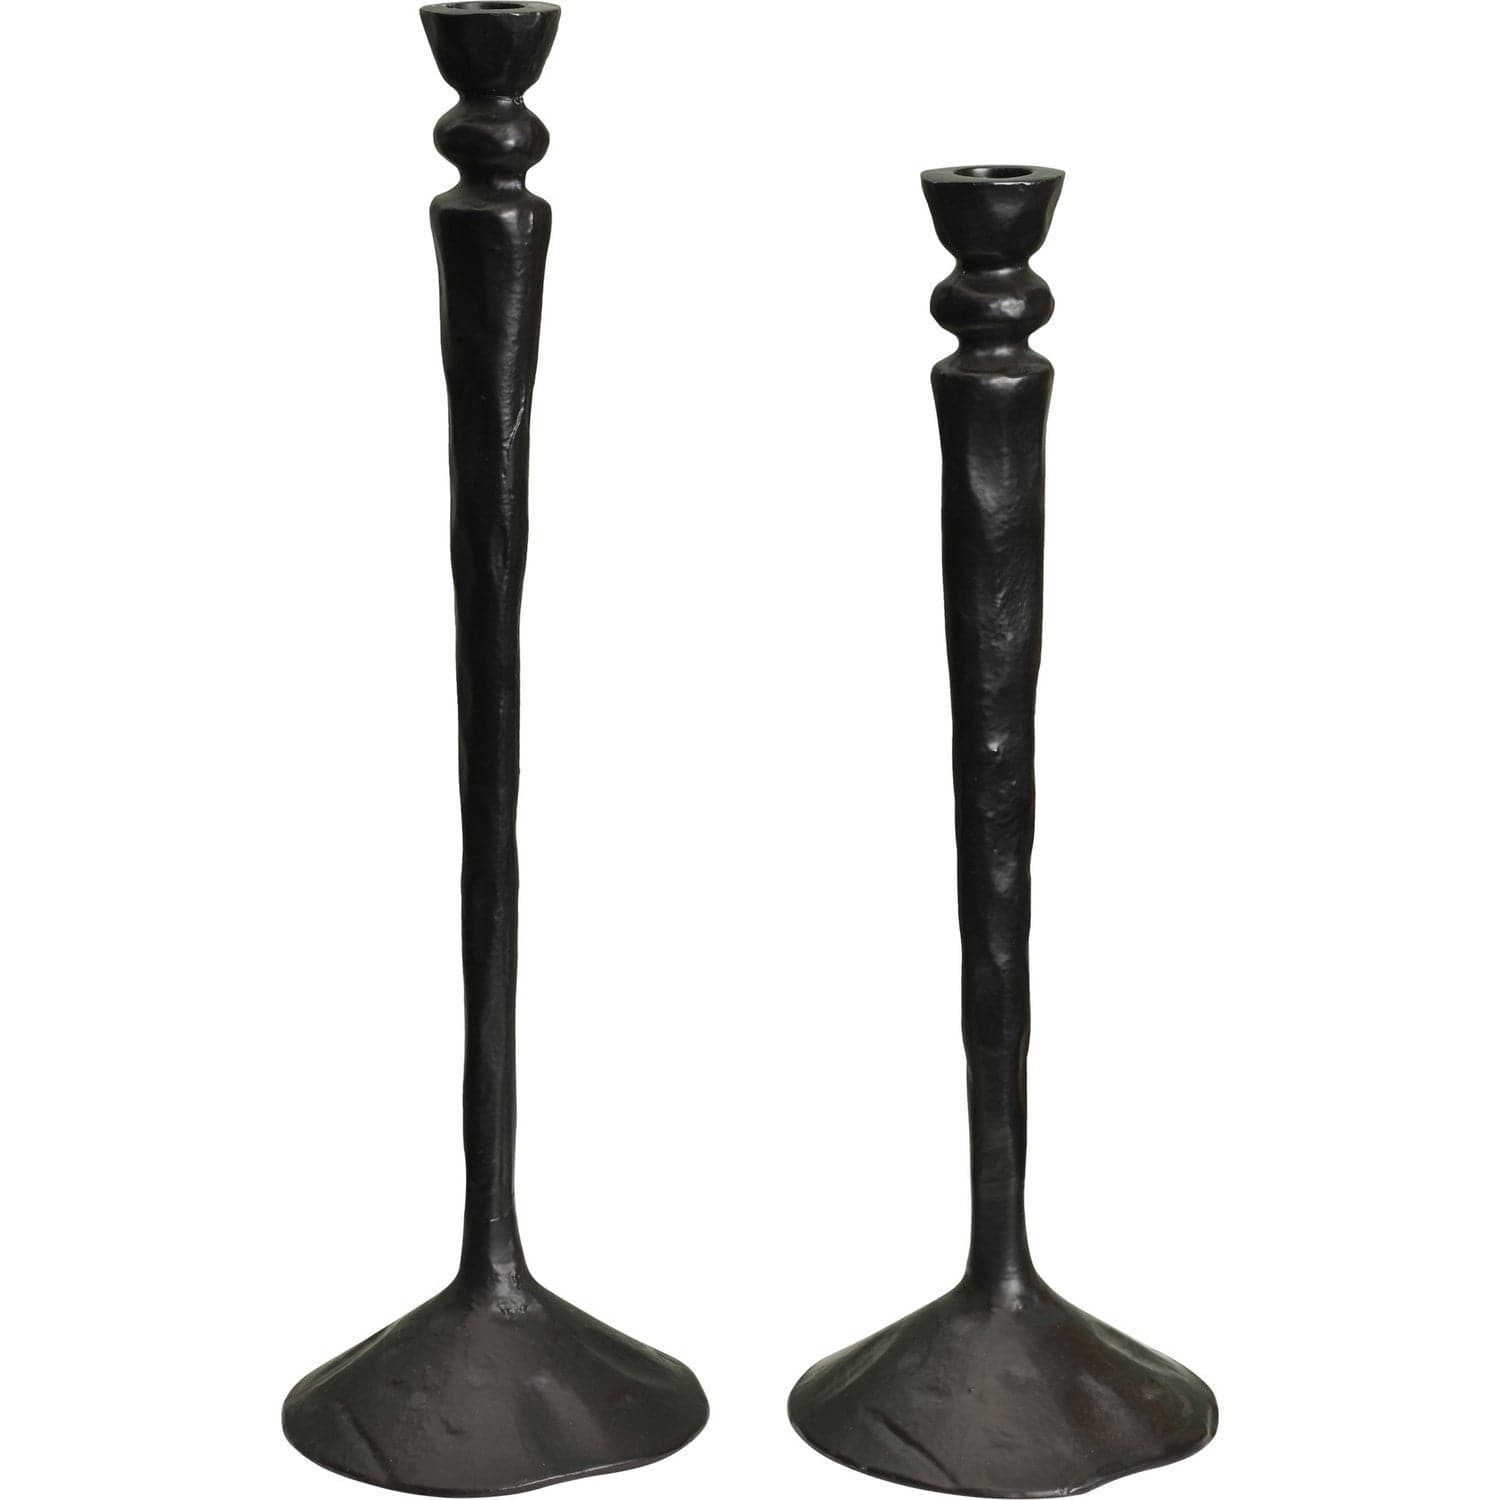 Renwil - CAN156 - Home Accents - Candles/Holders